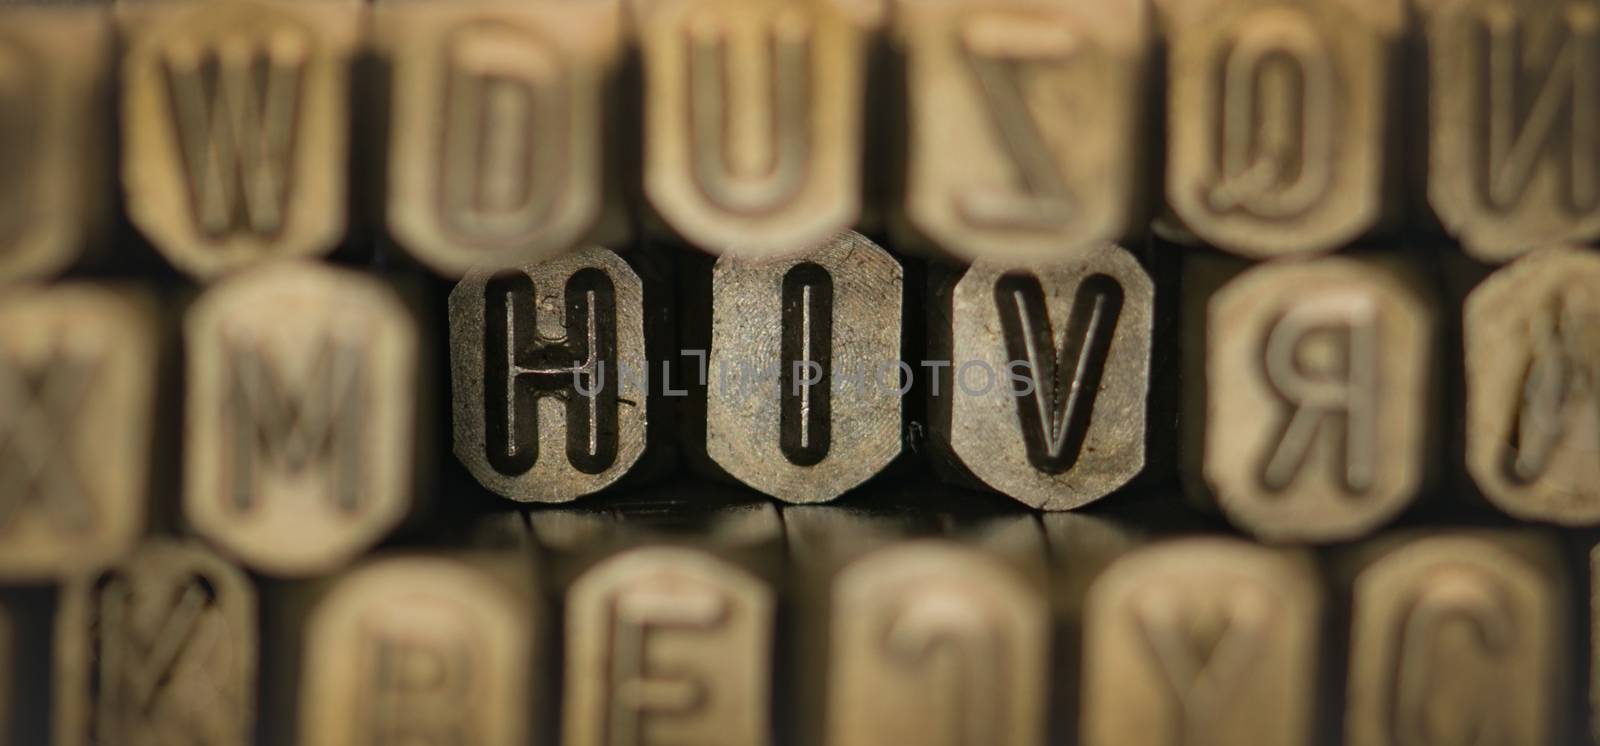 HIV spelled from metal stamp alphabet punch, HIV words stand for The Human Immunodeficiency Virus by Fahroni